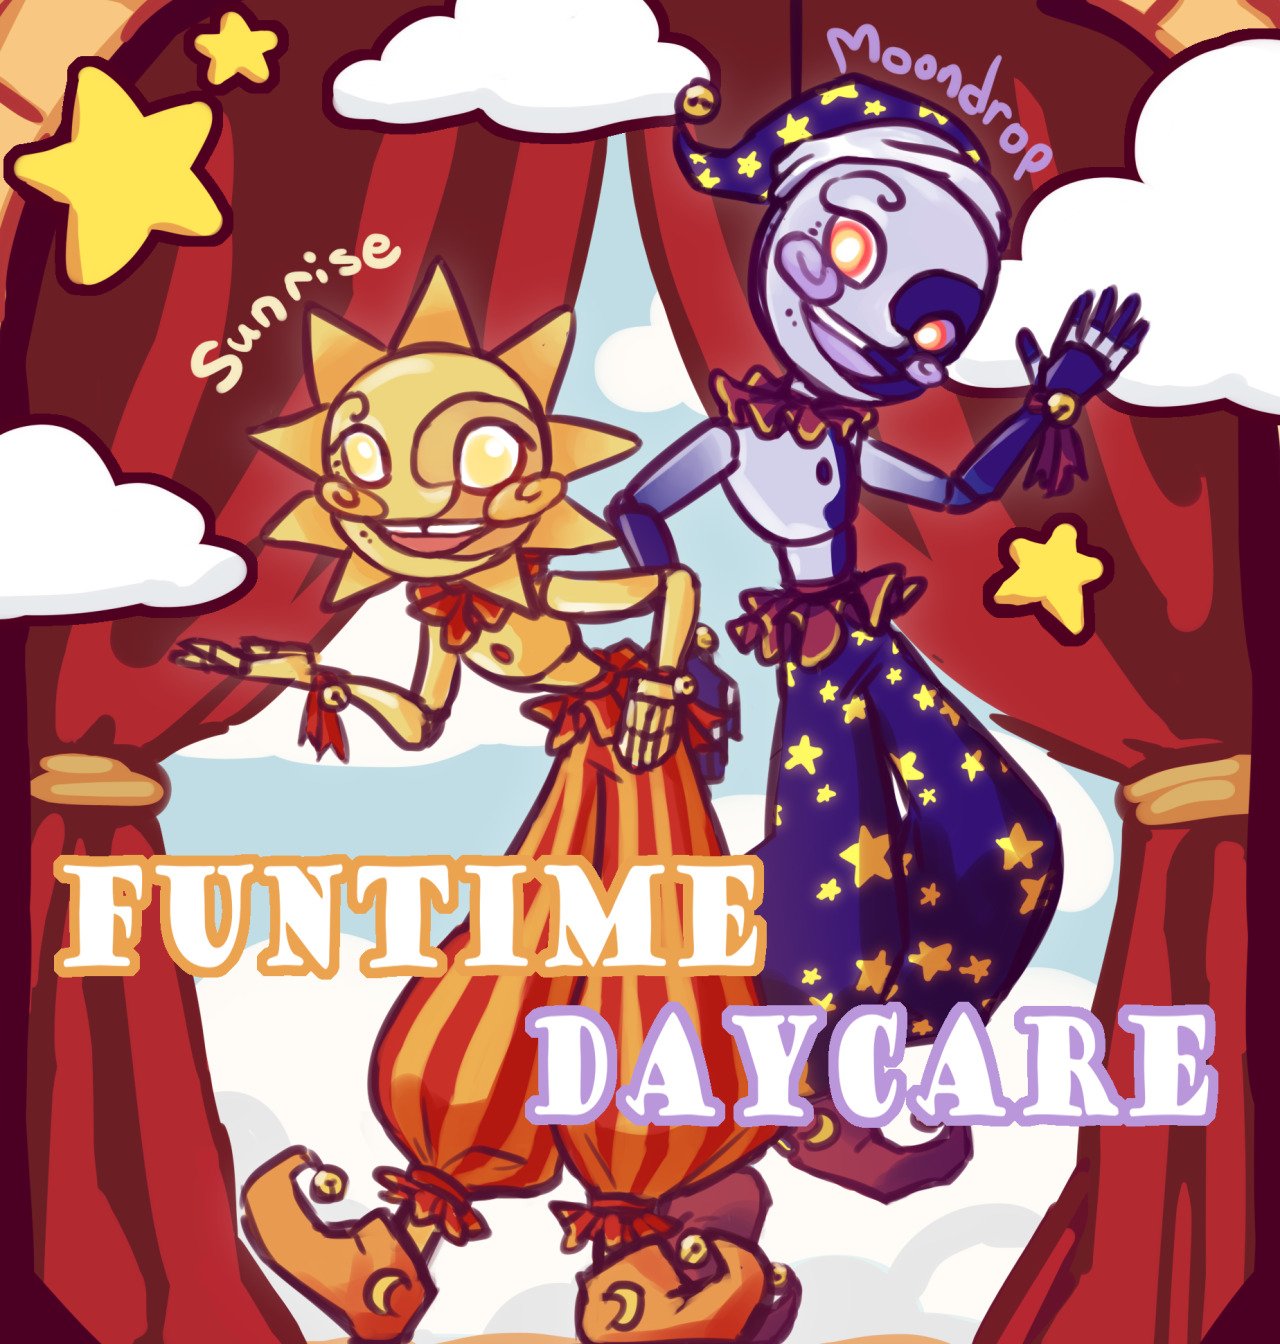 Hello, helloooo! What time is it? Its time to play! Come visit your  friends Sunrise and Moondrop in the Fazbear Funtime Daycare, where every  time is fun!couldn’t find an official theme name so i called it the ‘funtime daycare’ for the ‘day/night’ pun and also bc the entrance says ‘slide into fun’. later learned its apparently the superstar daycare but thats not going to stop metoday i give you: clownbots (cutified) tomorrow: who knows? #fnaf #fnaf security breach  #sunrise and moondrop  #sundrop and moondrop #sundrop#moondrop#fnaf sb #five nights at freddys #fnaf fanart #fnaf sun and moon #fnaf daycare#art#art etc#my art #artists on tumblr  #I Will Make The Robot Mascots Cute Come Hell Or High Water